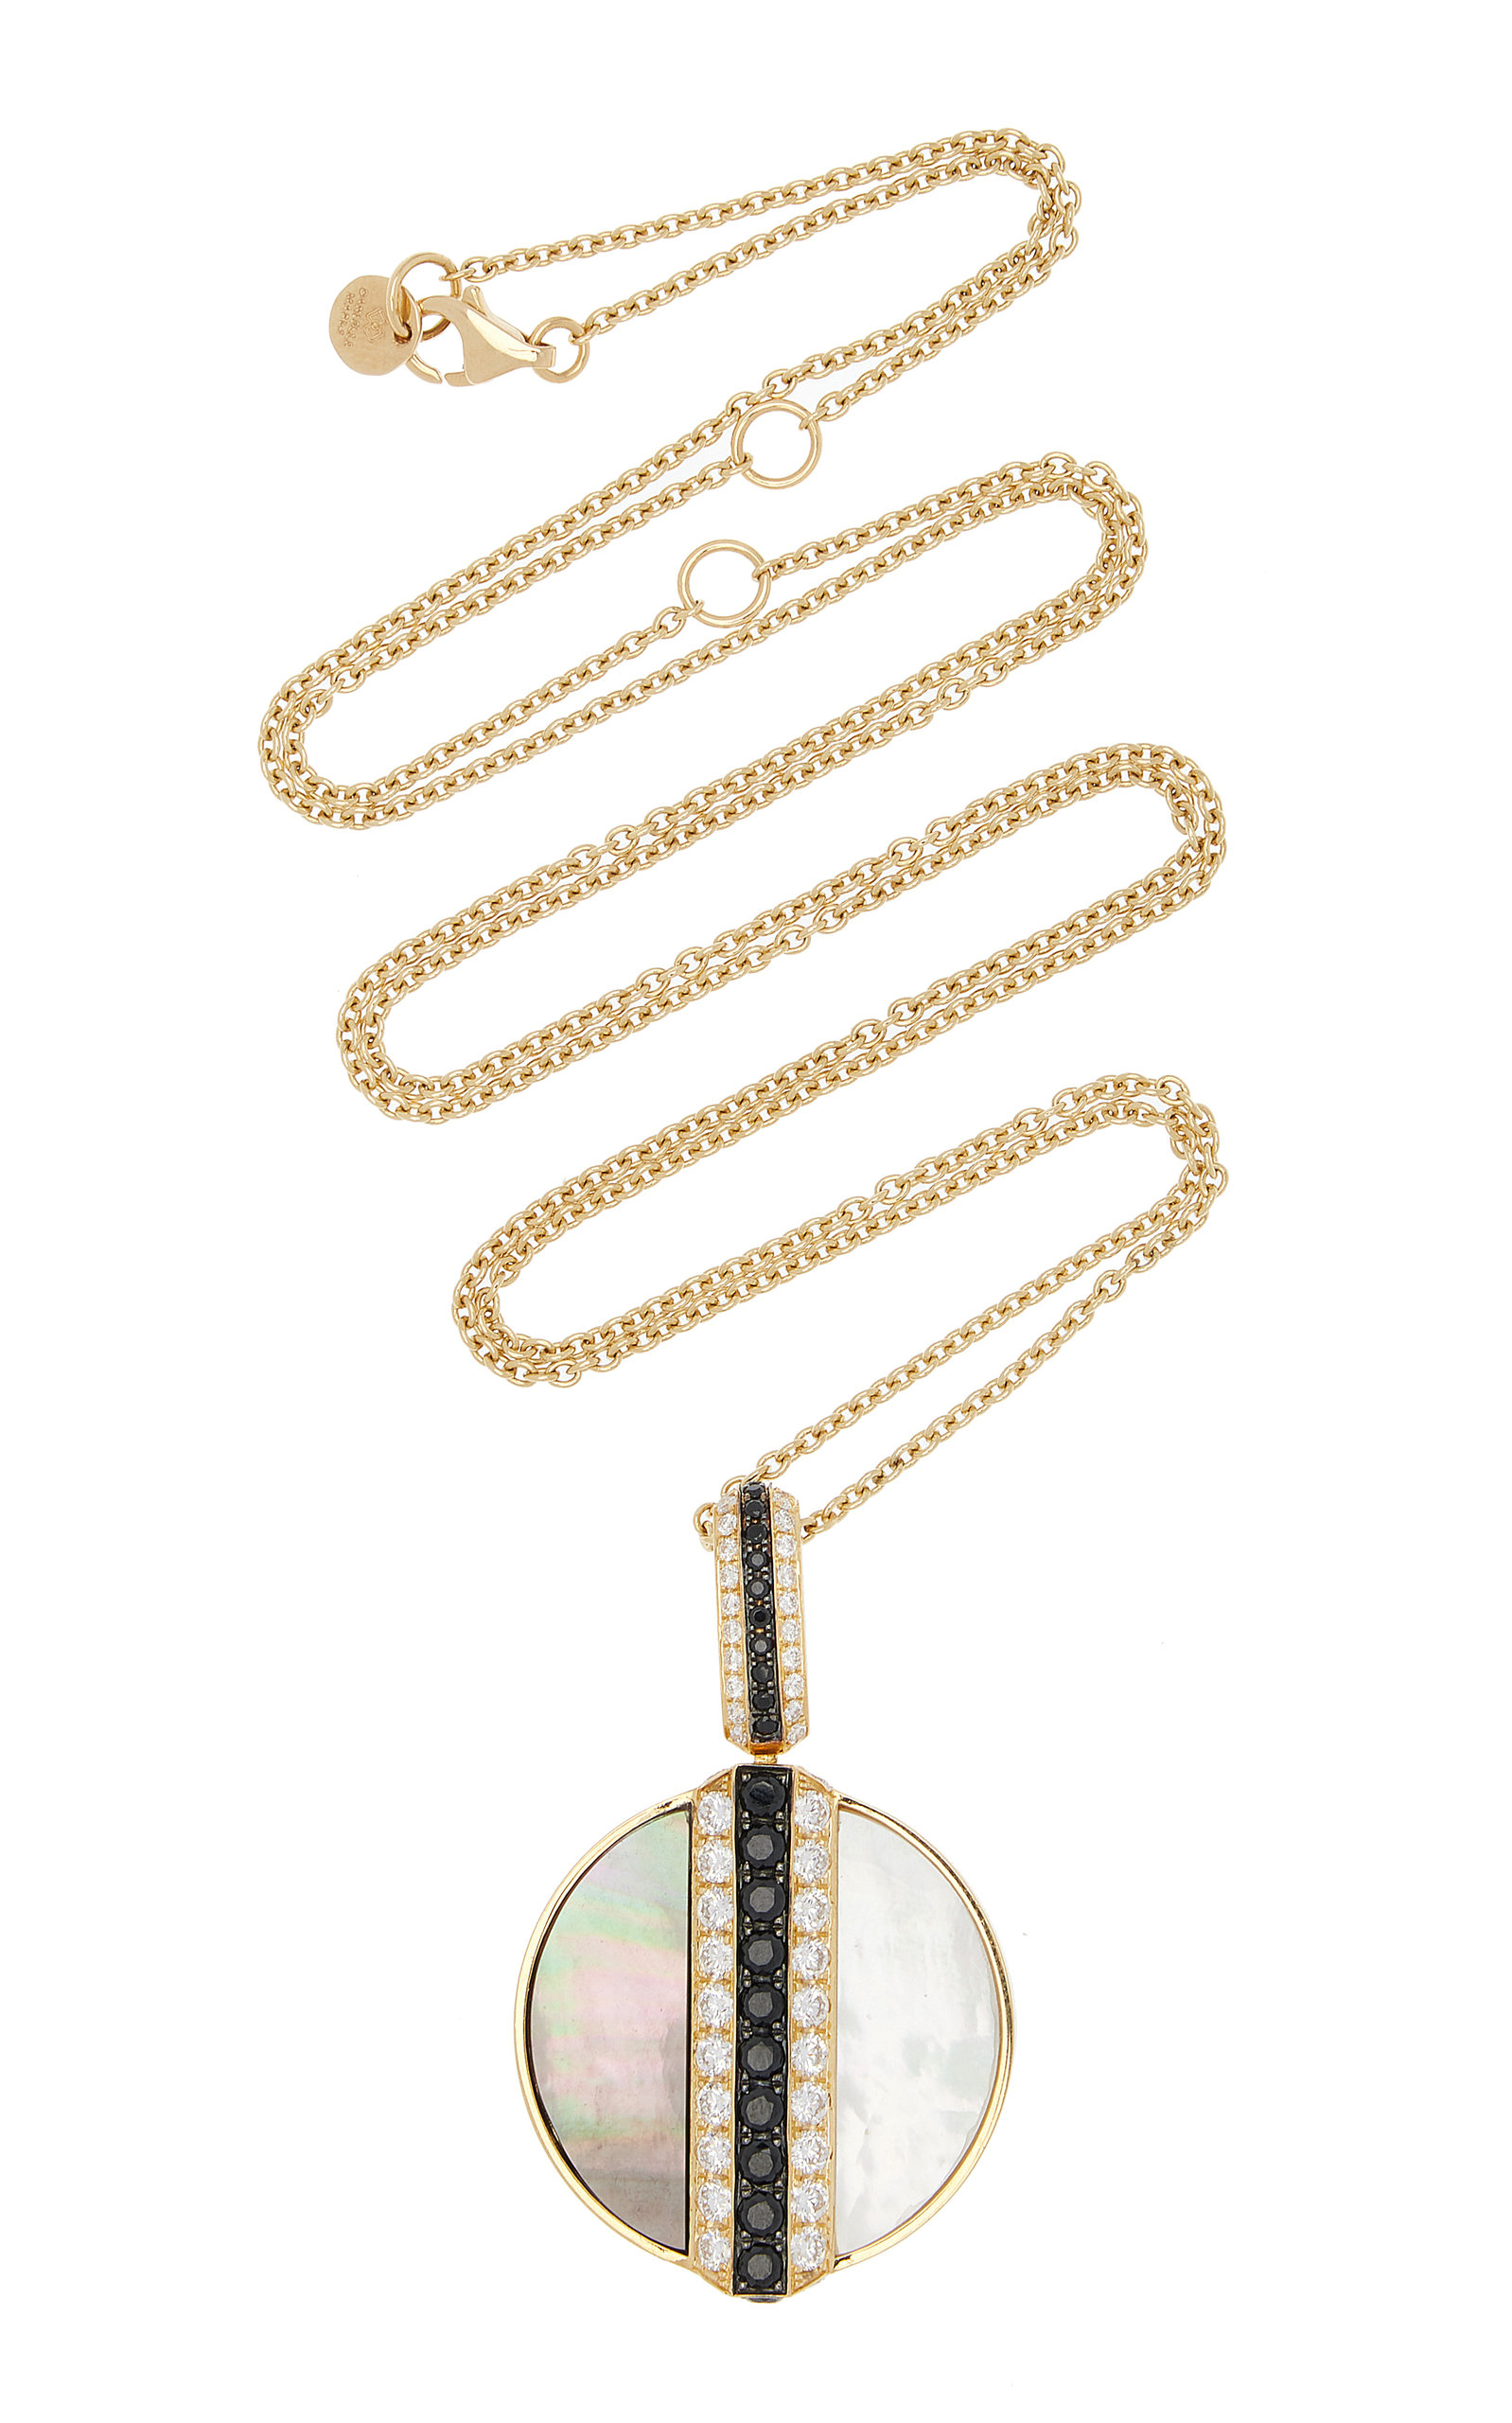 DANIELLE MARKS LUNA 18K YELLOW GOLD MOTHER-OF-PEARL; DIAMOND NECKLACE